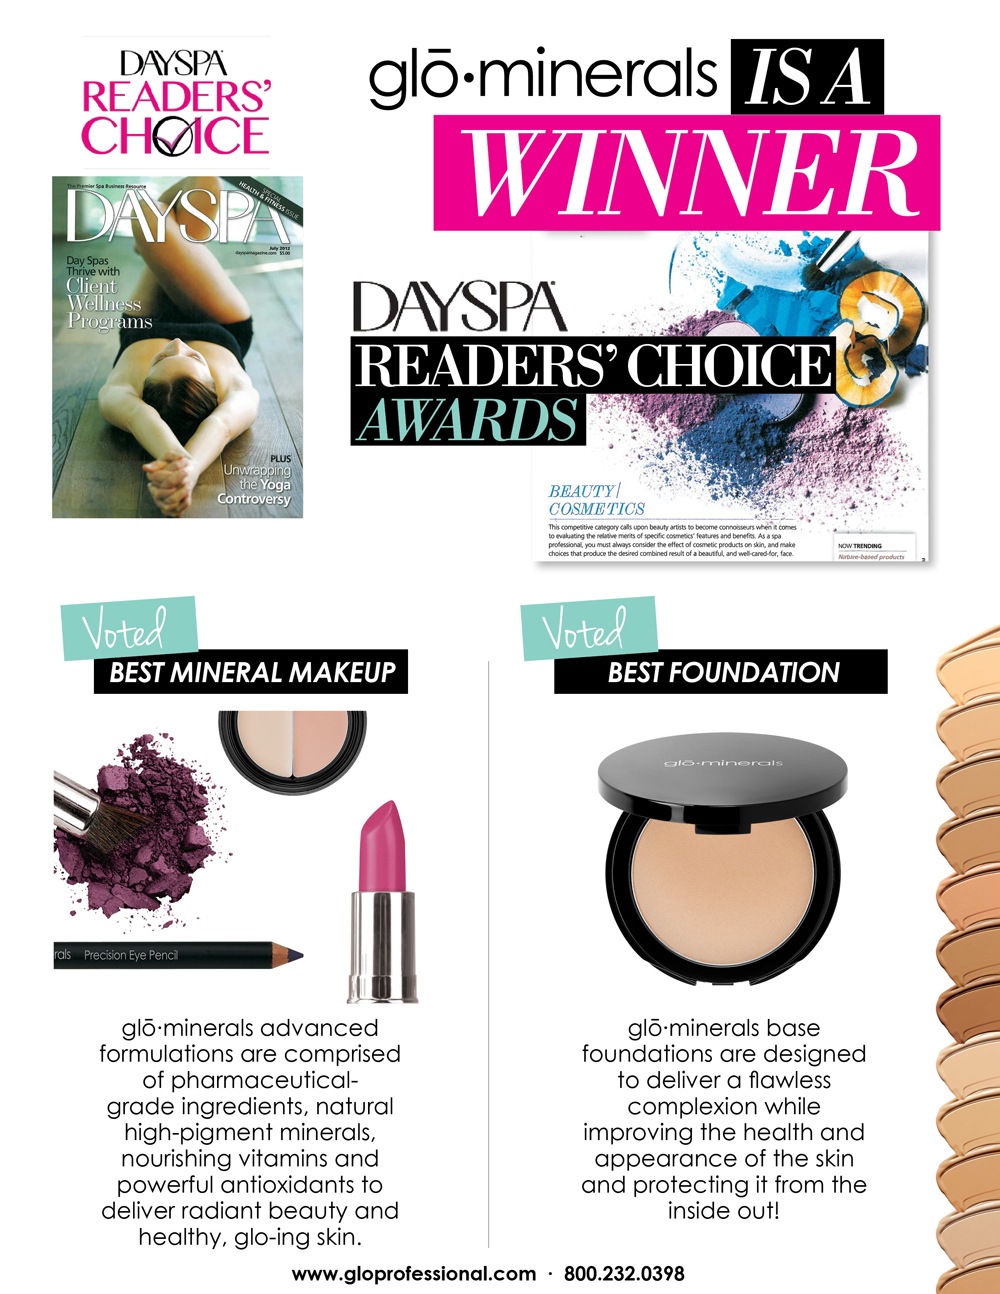 Glow Minerals Makeup in day spa reader's choice magazine